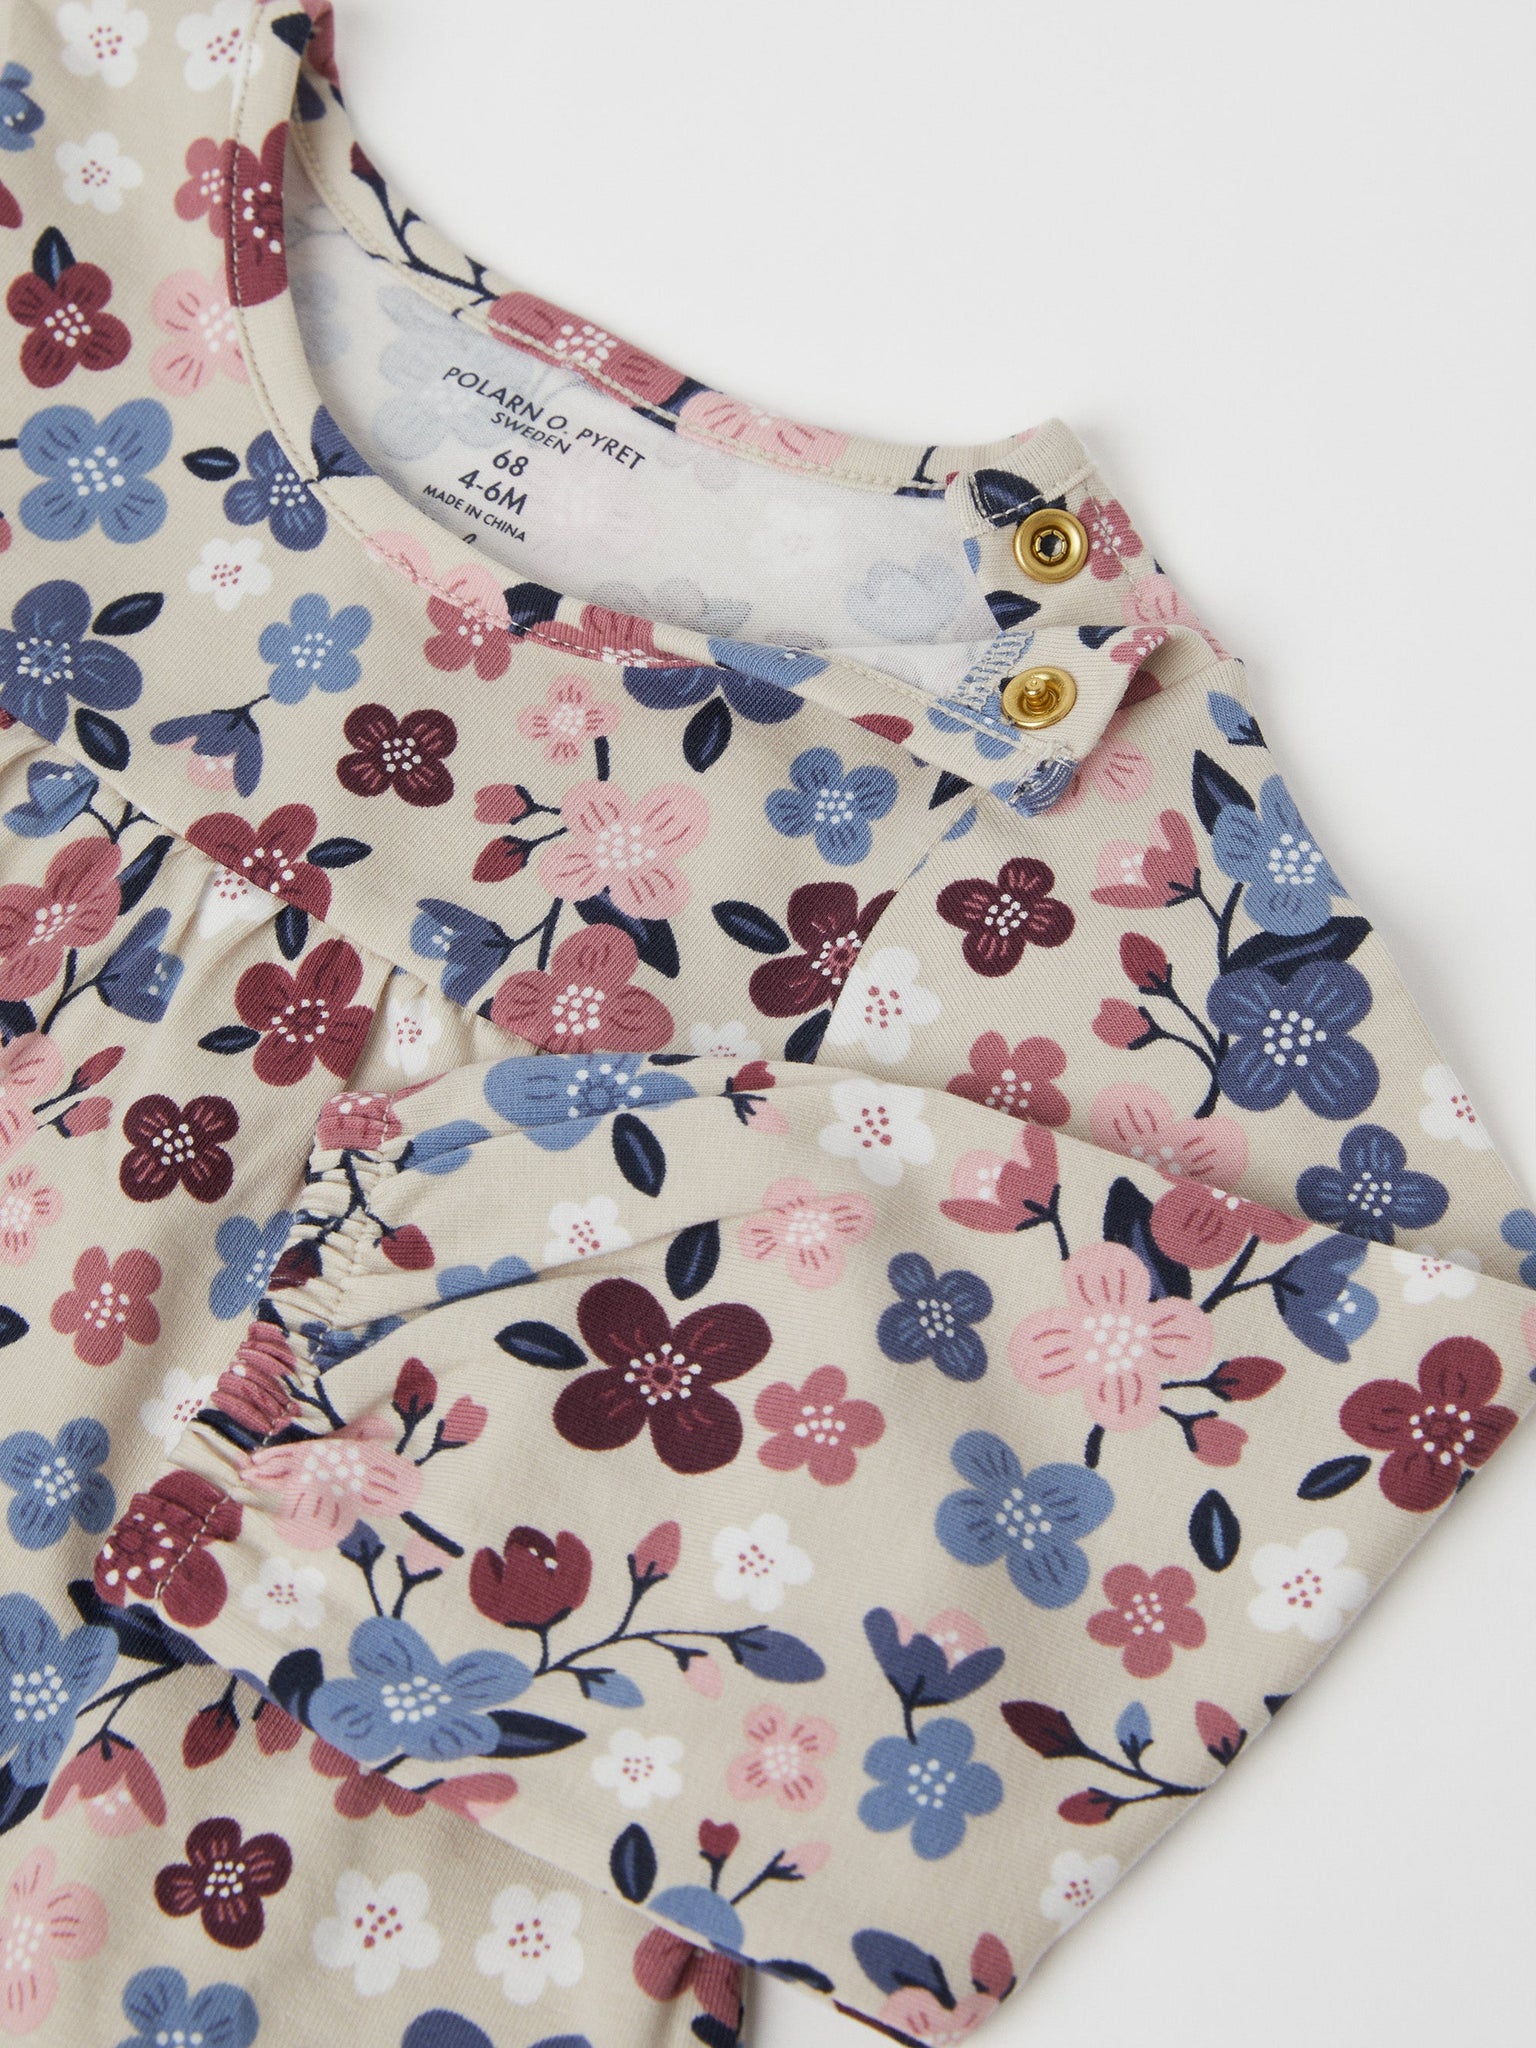 Organic Cotton Floral Baby Dress from the Polarn O. Pyret baby collection. Nordic baby clothes made from sustainable sources.